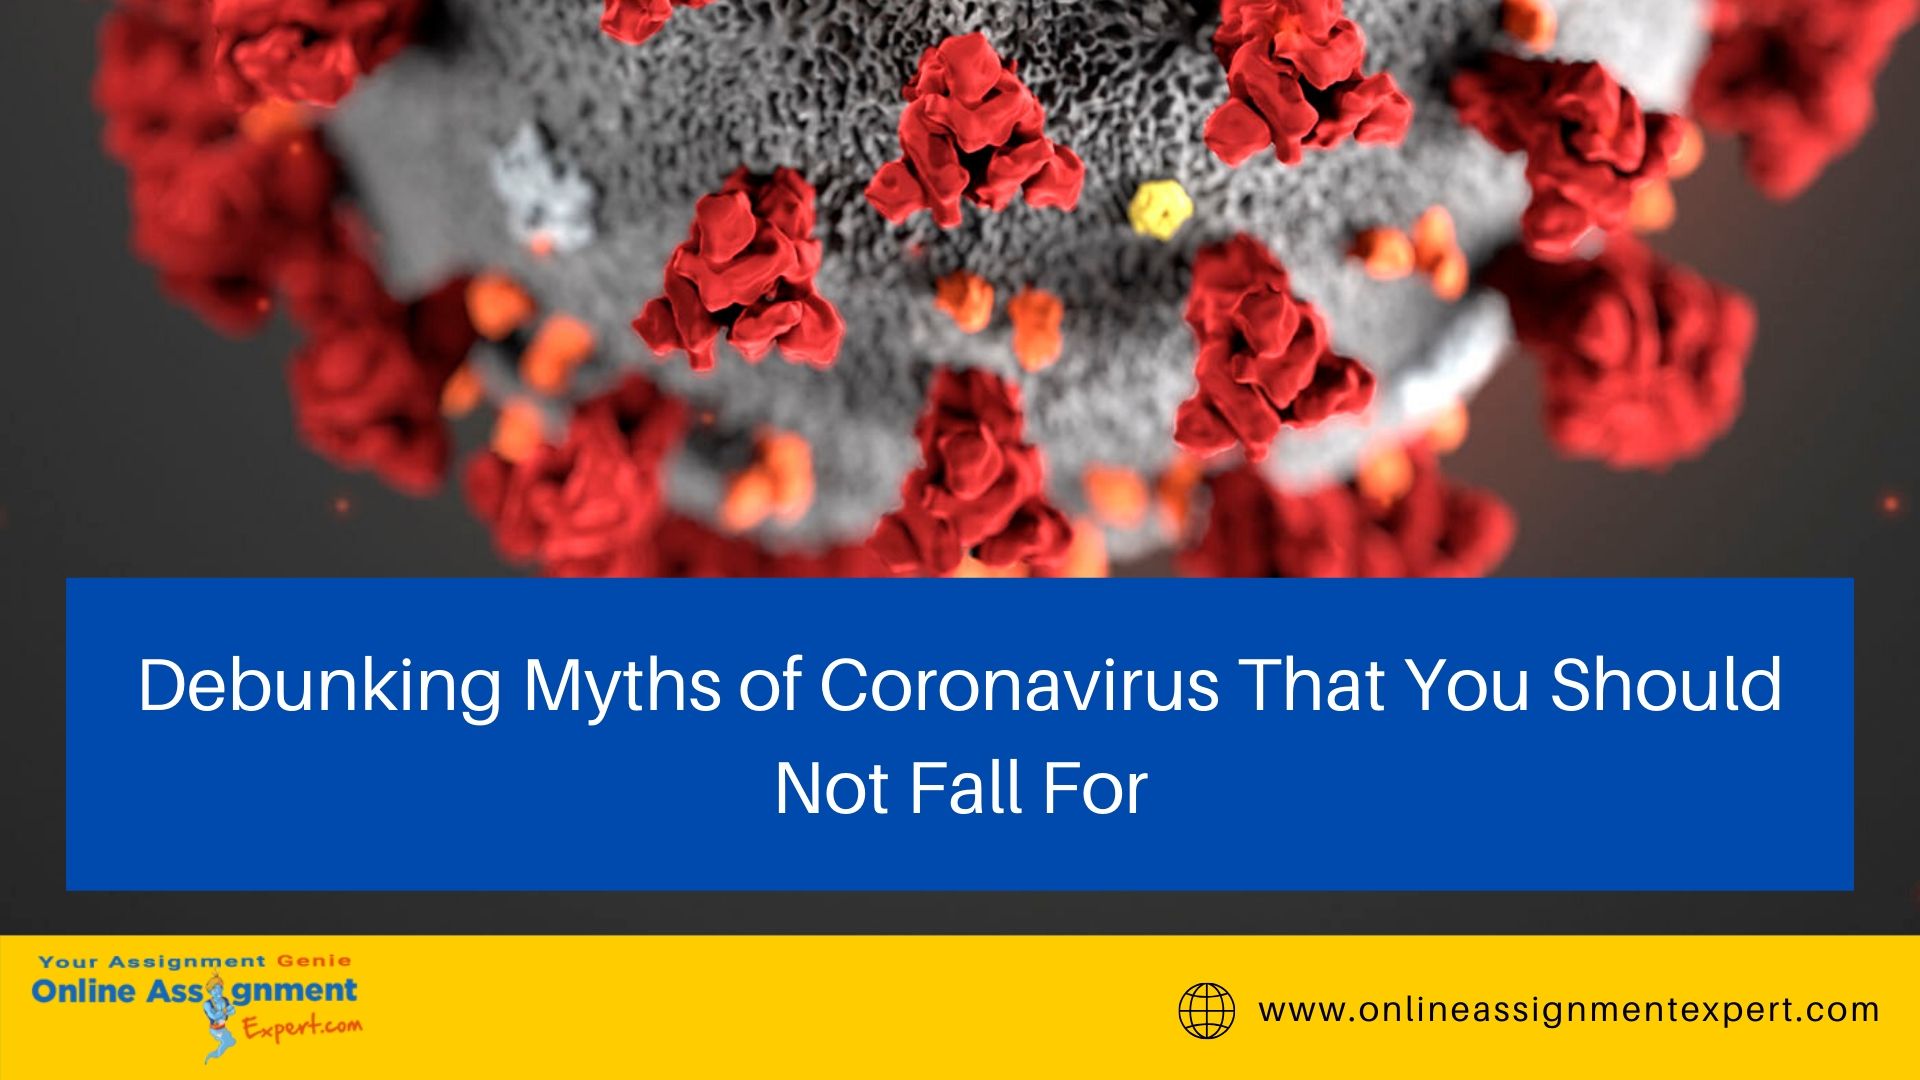 Debunking Myths of Coronavirus That You Should Not Fall For